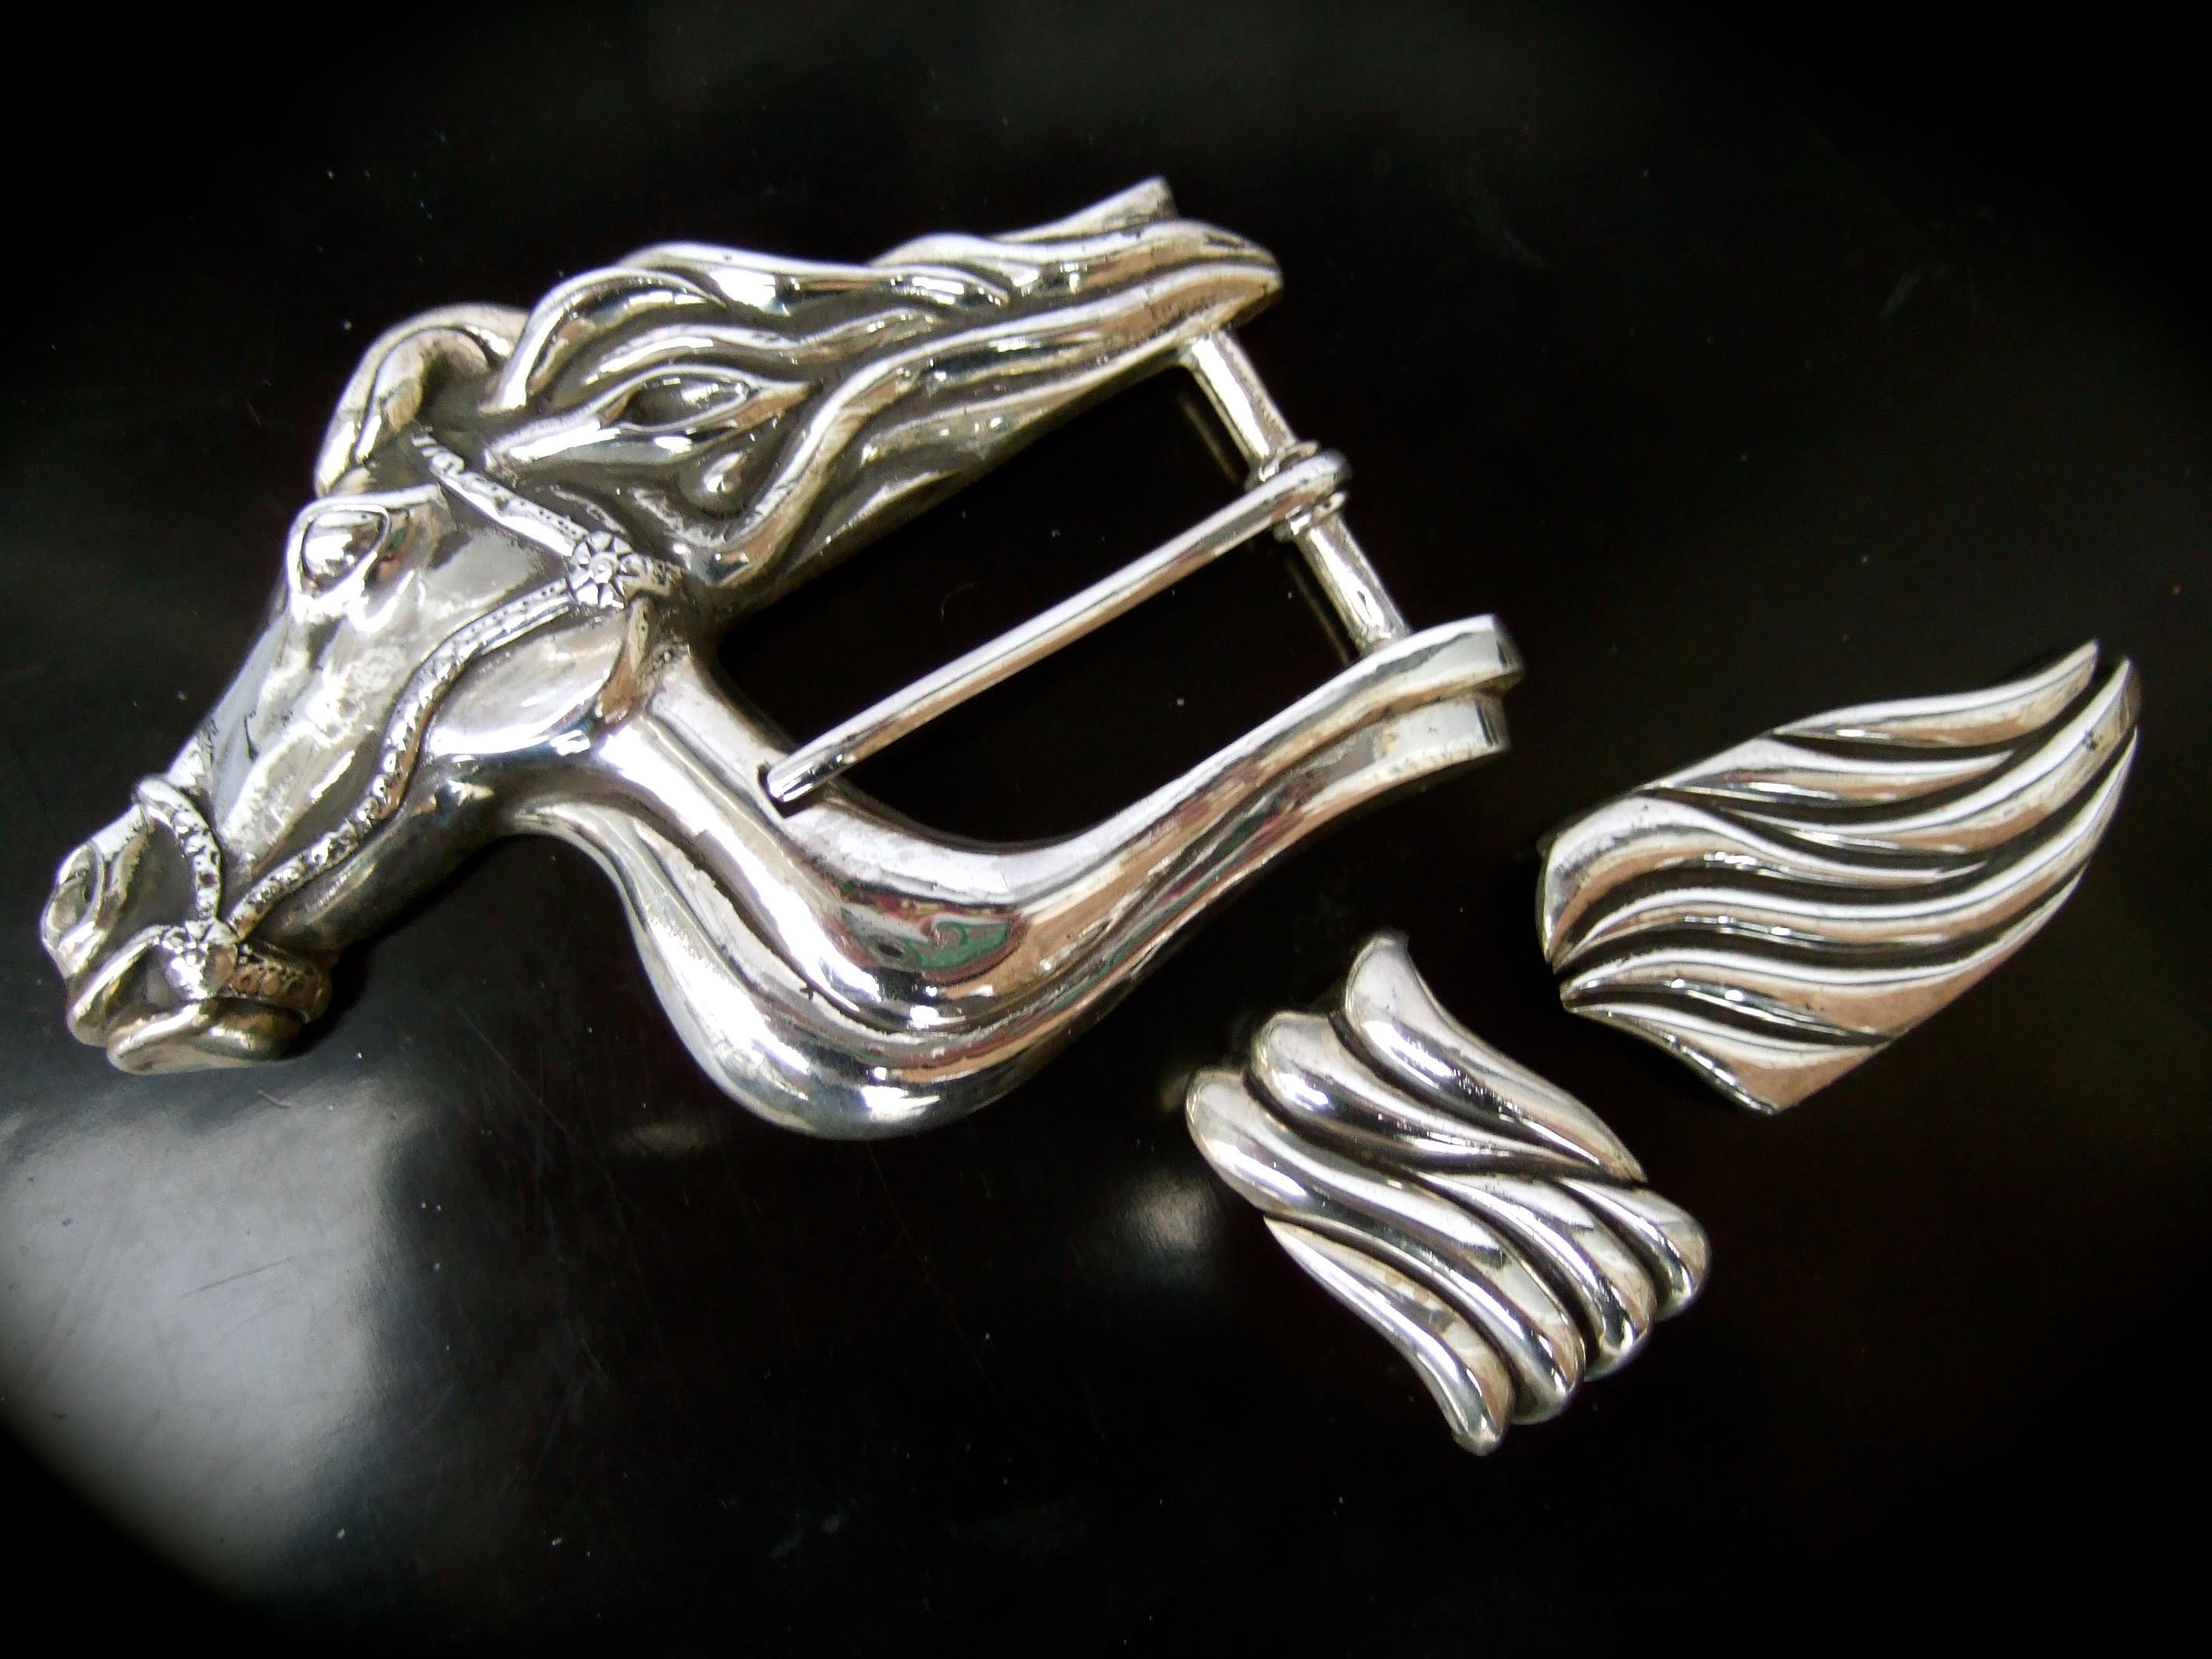 Sterling silver artisan equine belt buckle designed by Big Al c 1995
The unique large scale uni-sex sterling silver buckle 
is designed with a stylized horse head with a sinuous flowing mane 

The sterling buckle is paired with a set of sterling